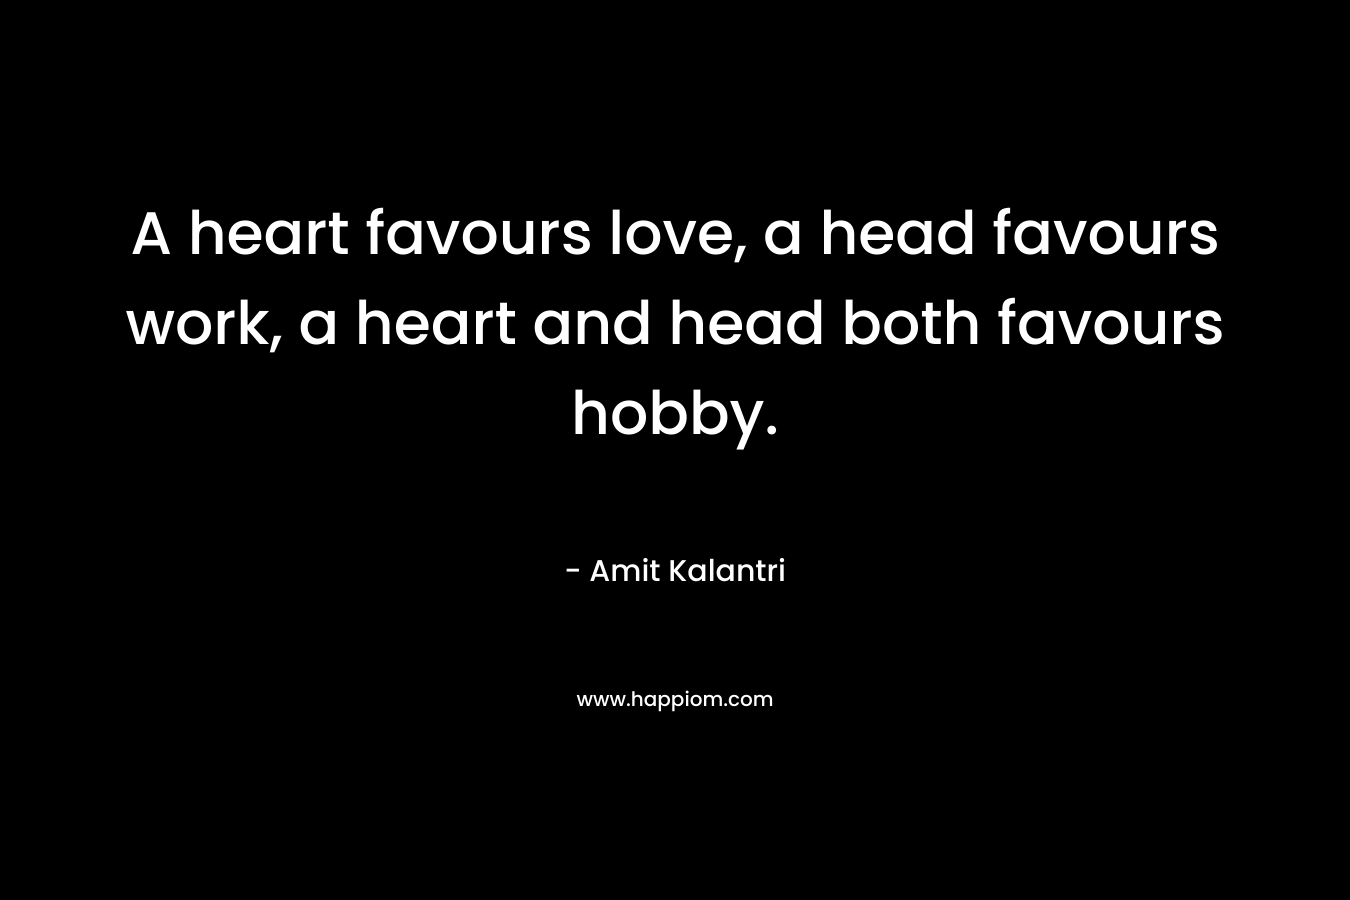 A heart favours love, a head favours work, a heart and head both favours hobby.